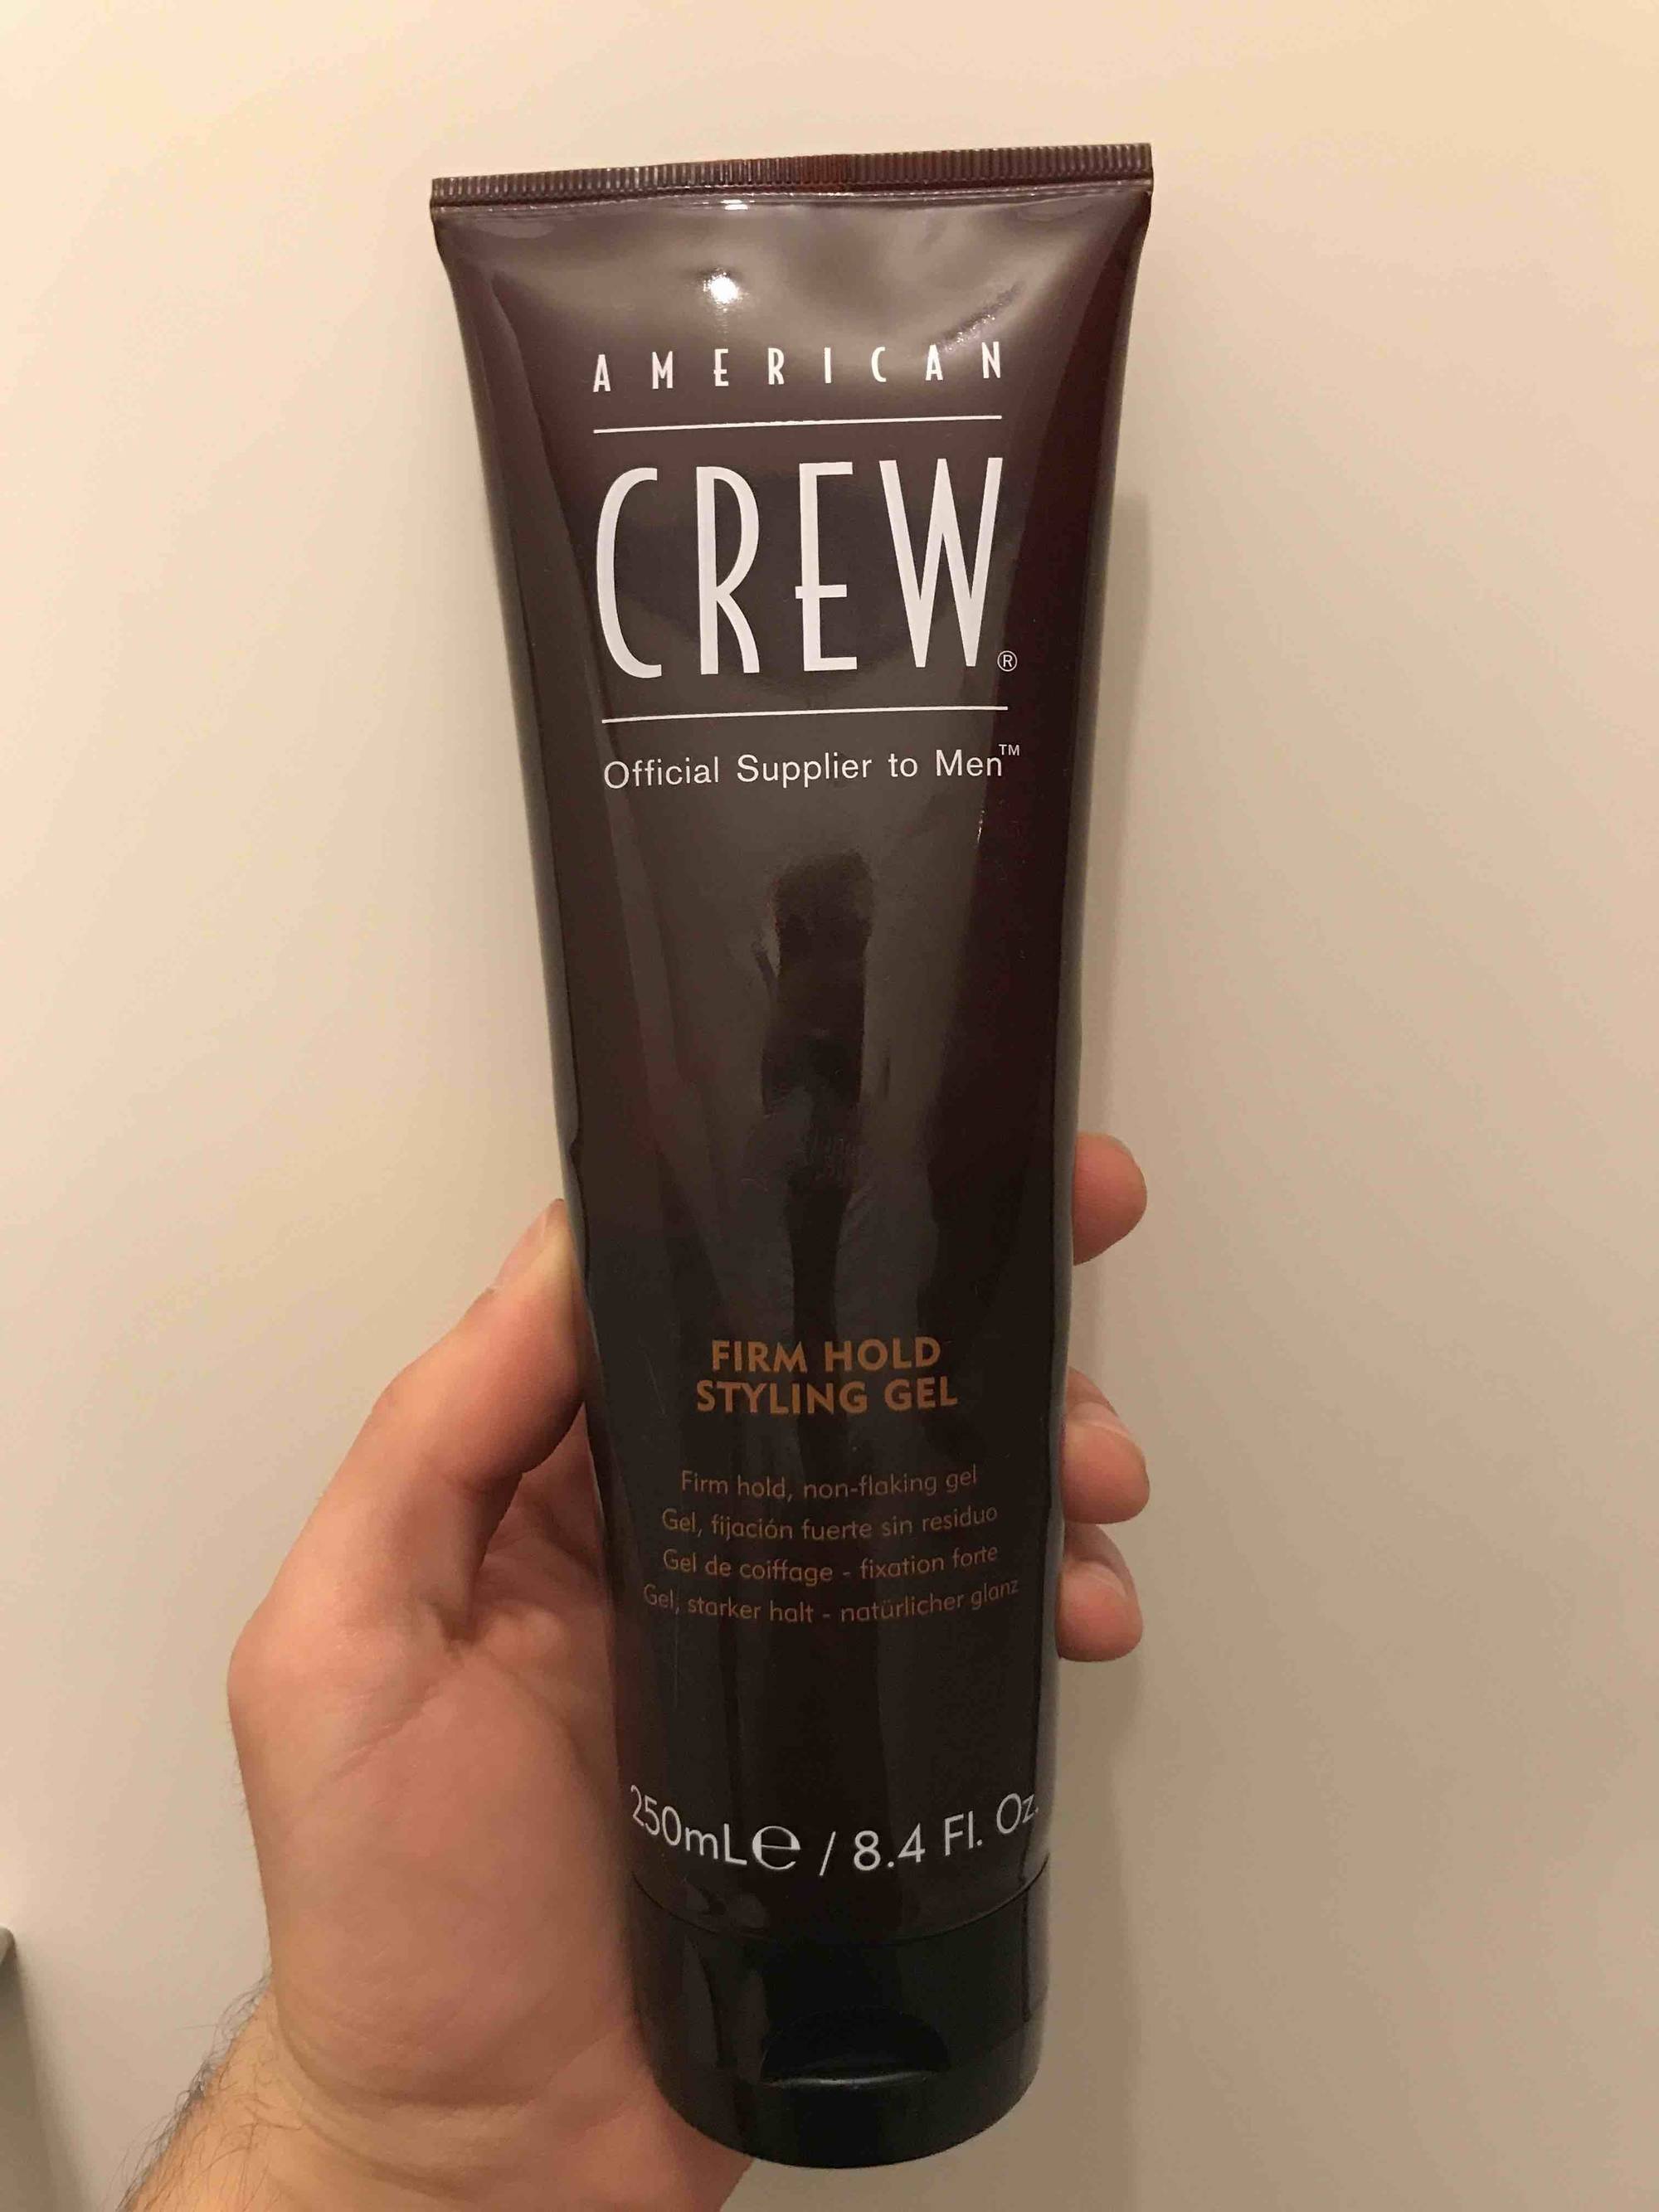 AMERICAN CREW - Firm hold styling gel